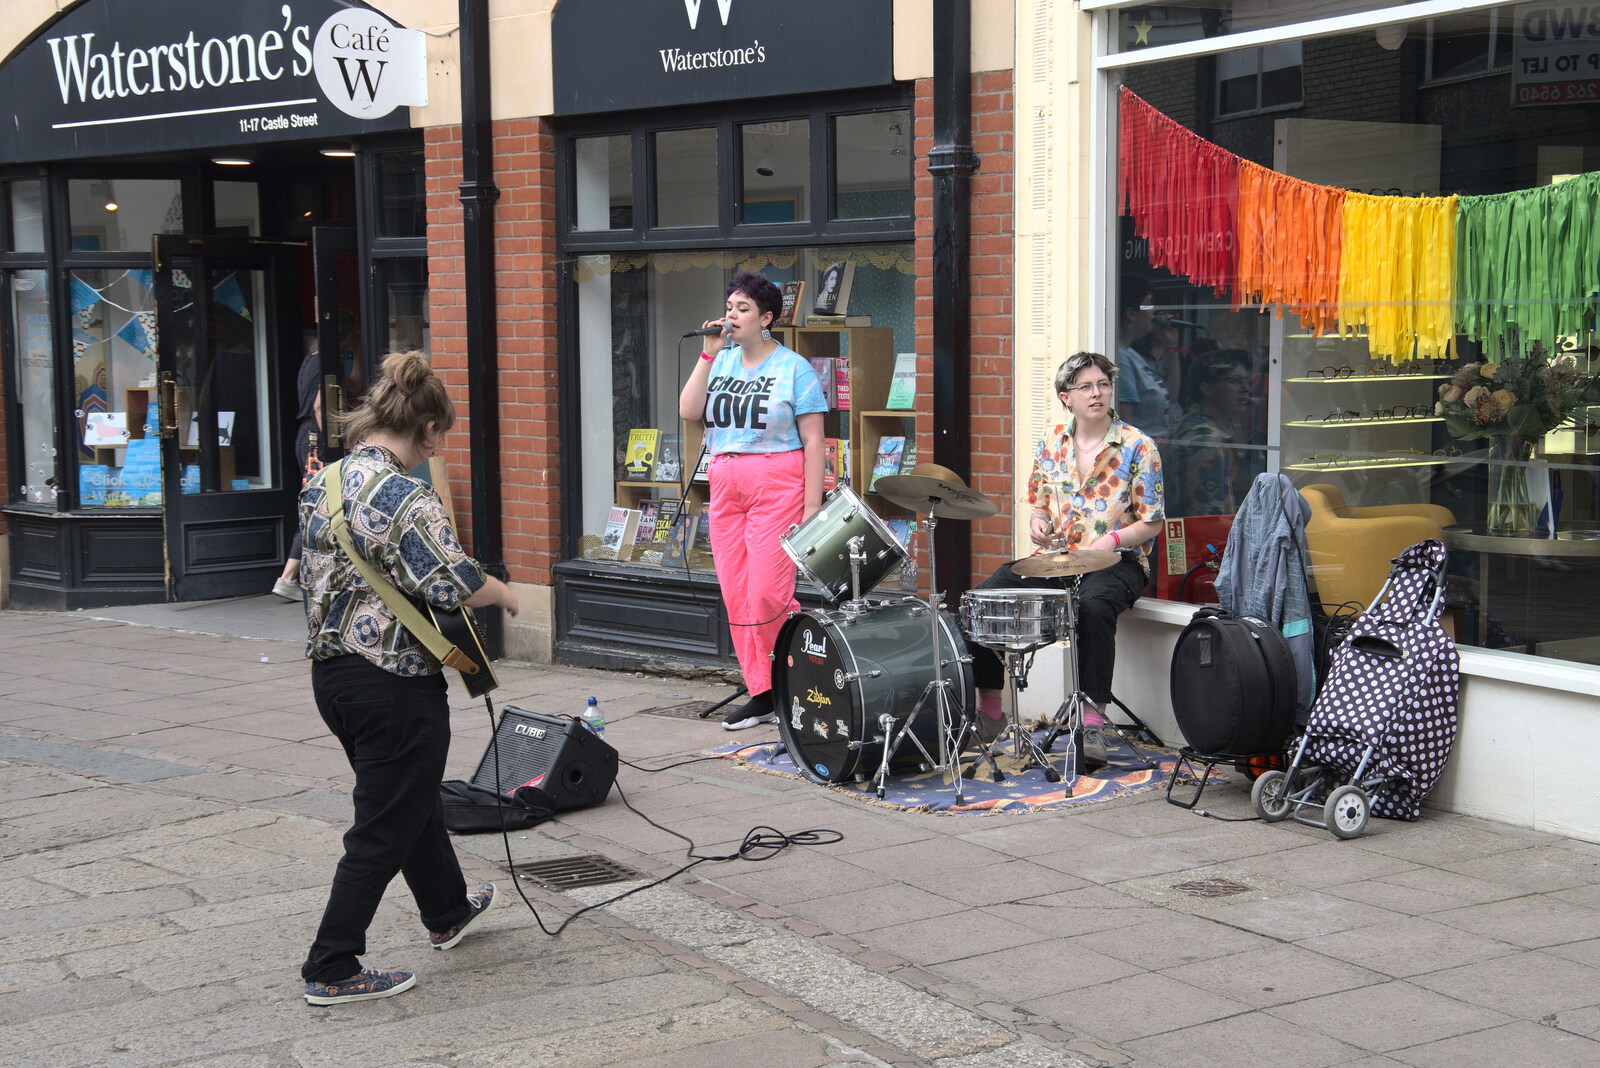 A music act on Castle Street from The Lord Mayor's Procession, Norwich, Norfolk - 2nd July 2022